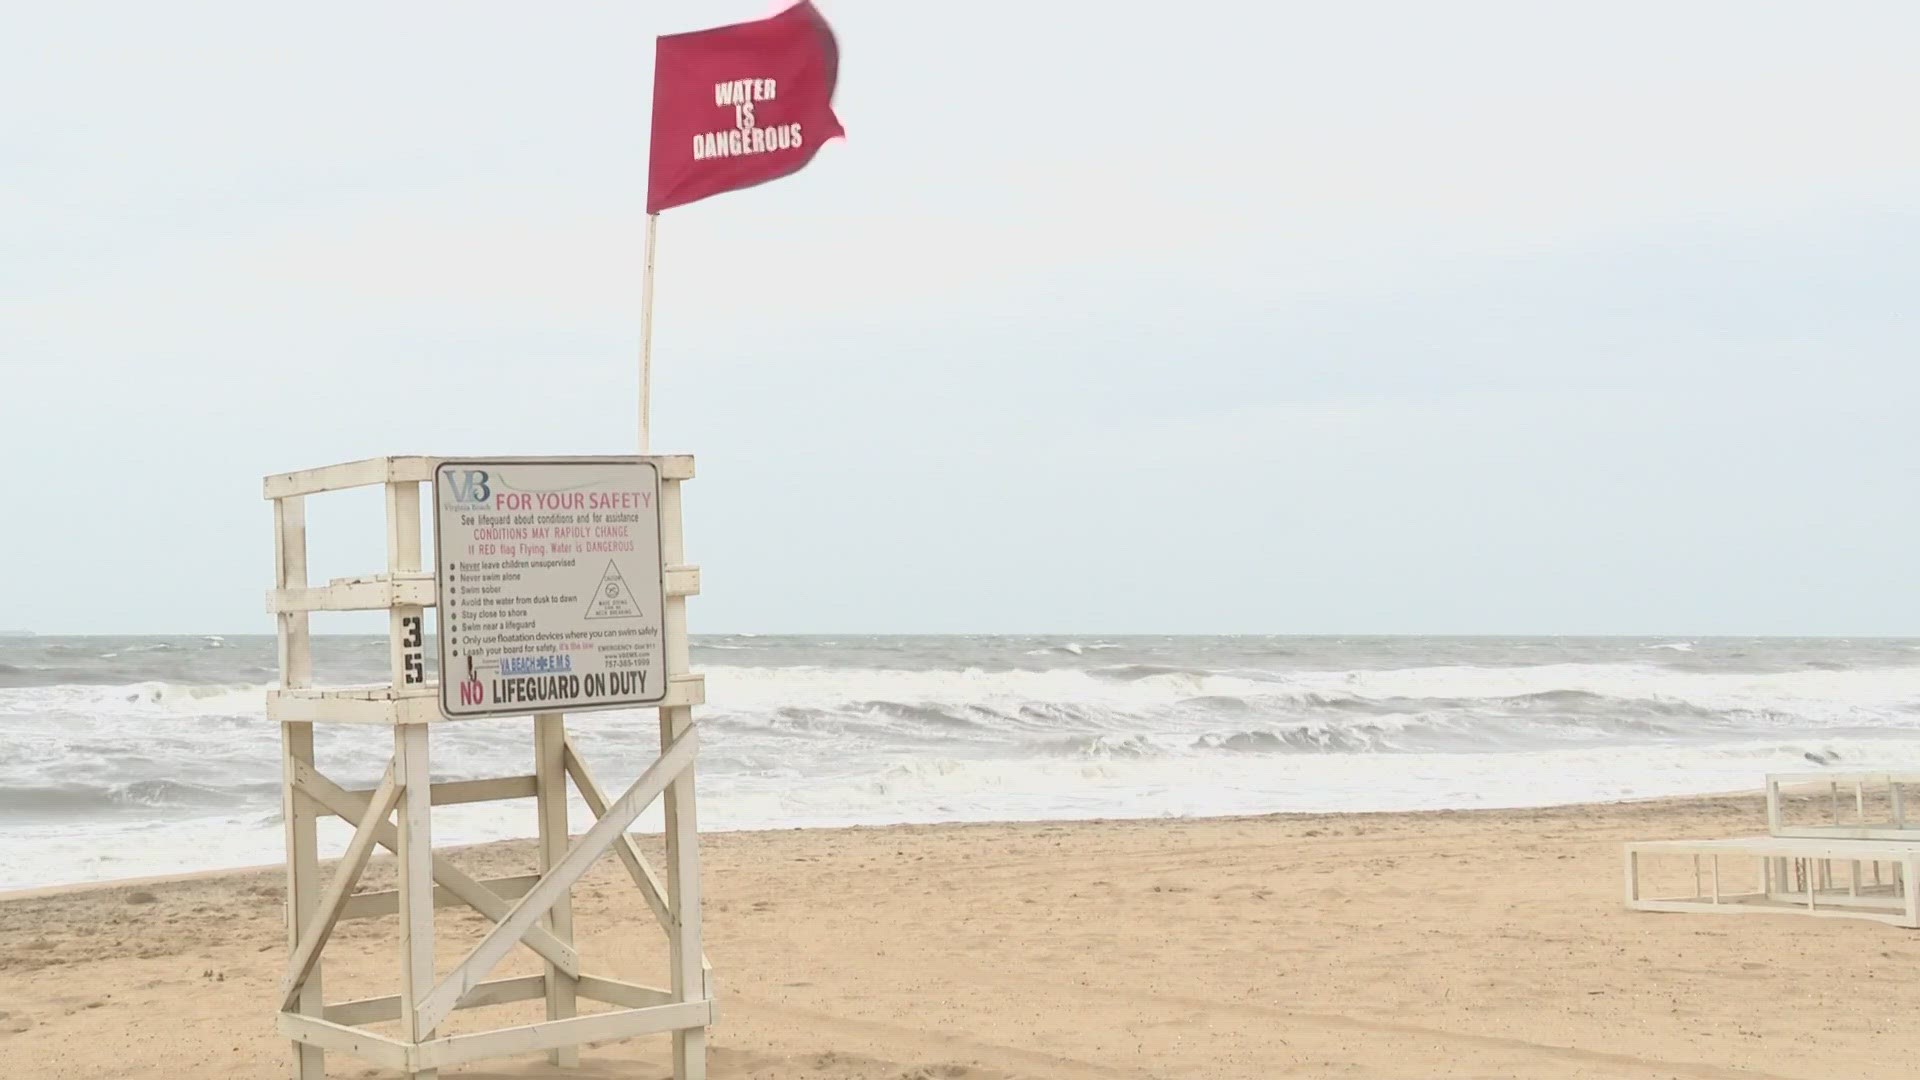 Red flags have been at the Oceanfront since Friday, warning people to stay out of the rough water. But still, people are finding ways to enjoy the long weekend.